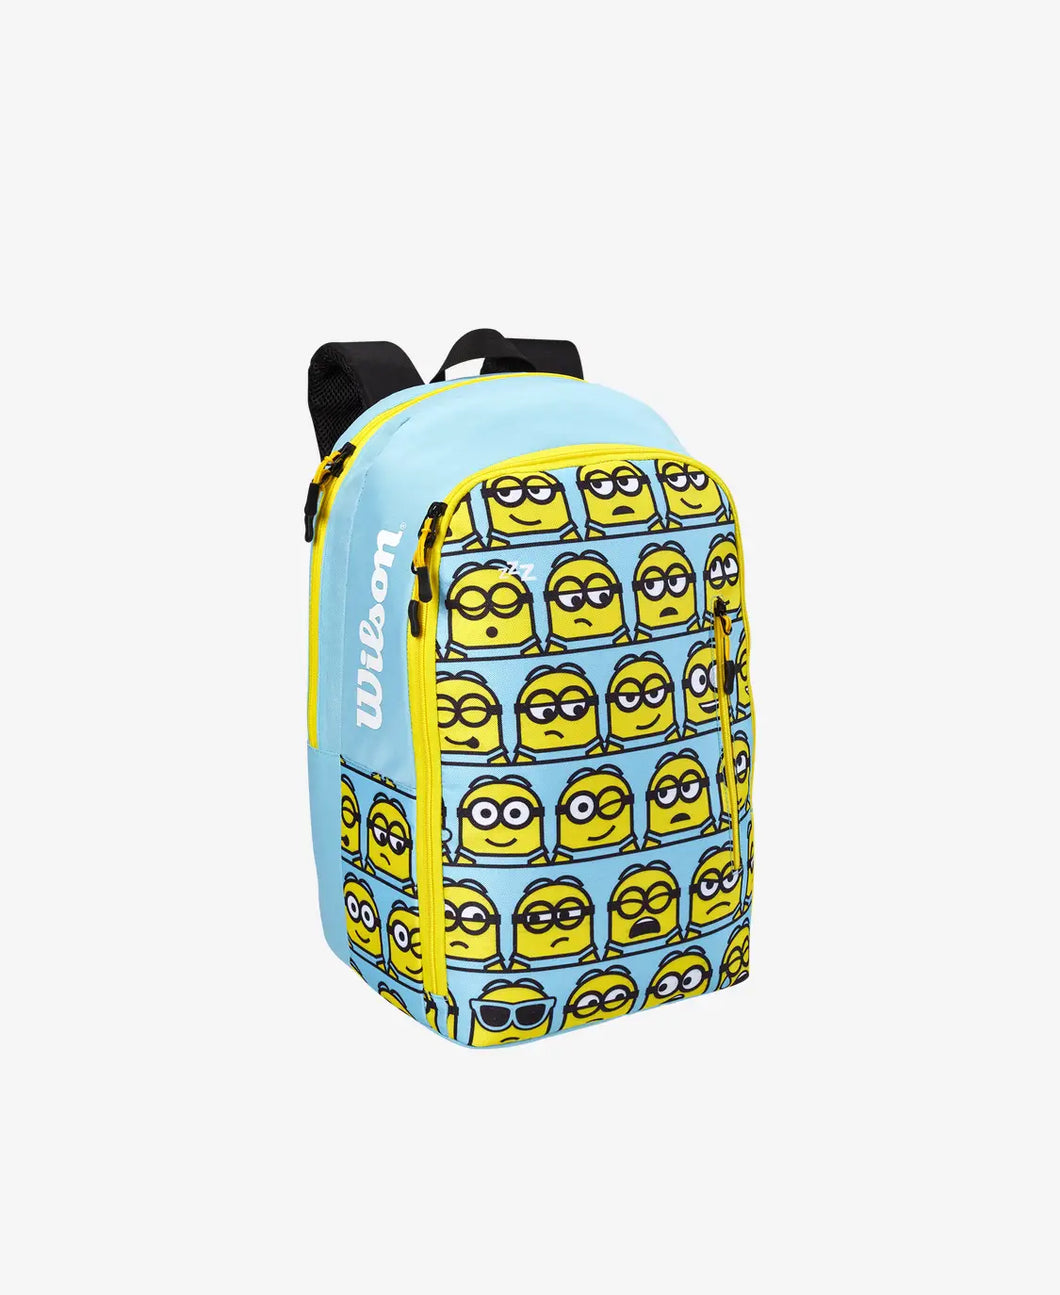 Wilson Minions 2.0 Team Backpack - NEW ARRIVAL